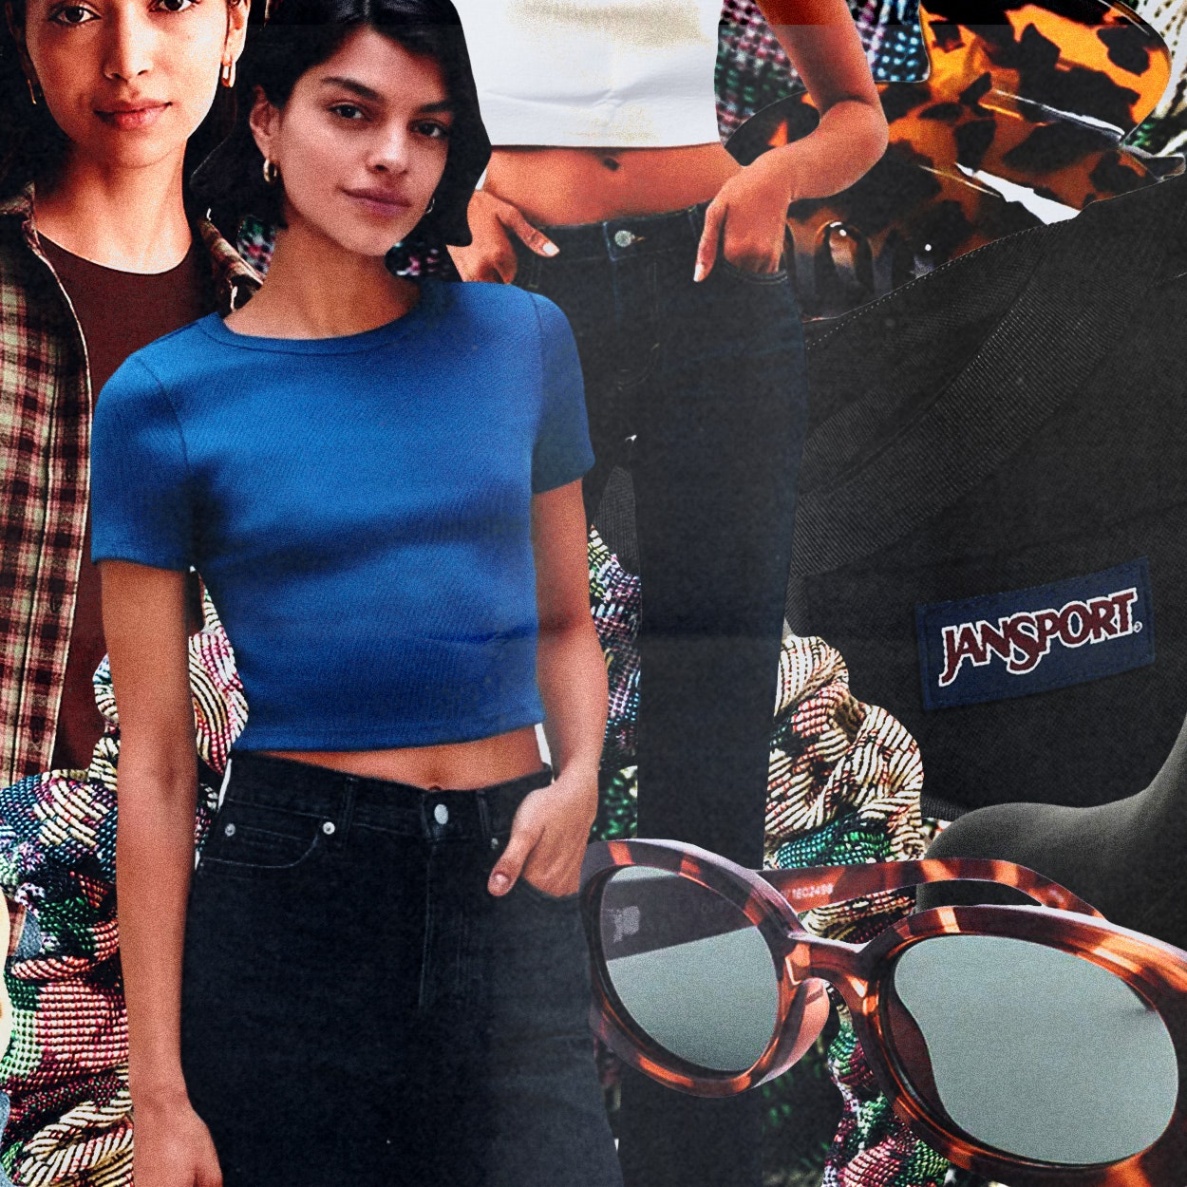 90s fashion images Bulan 5 The s Fashion Trends We